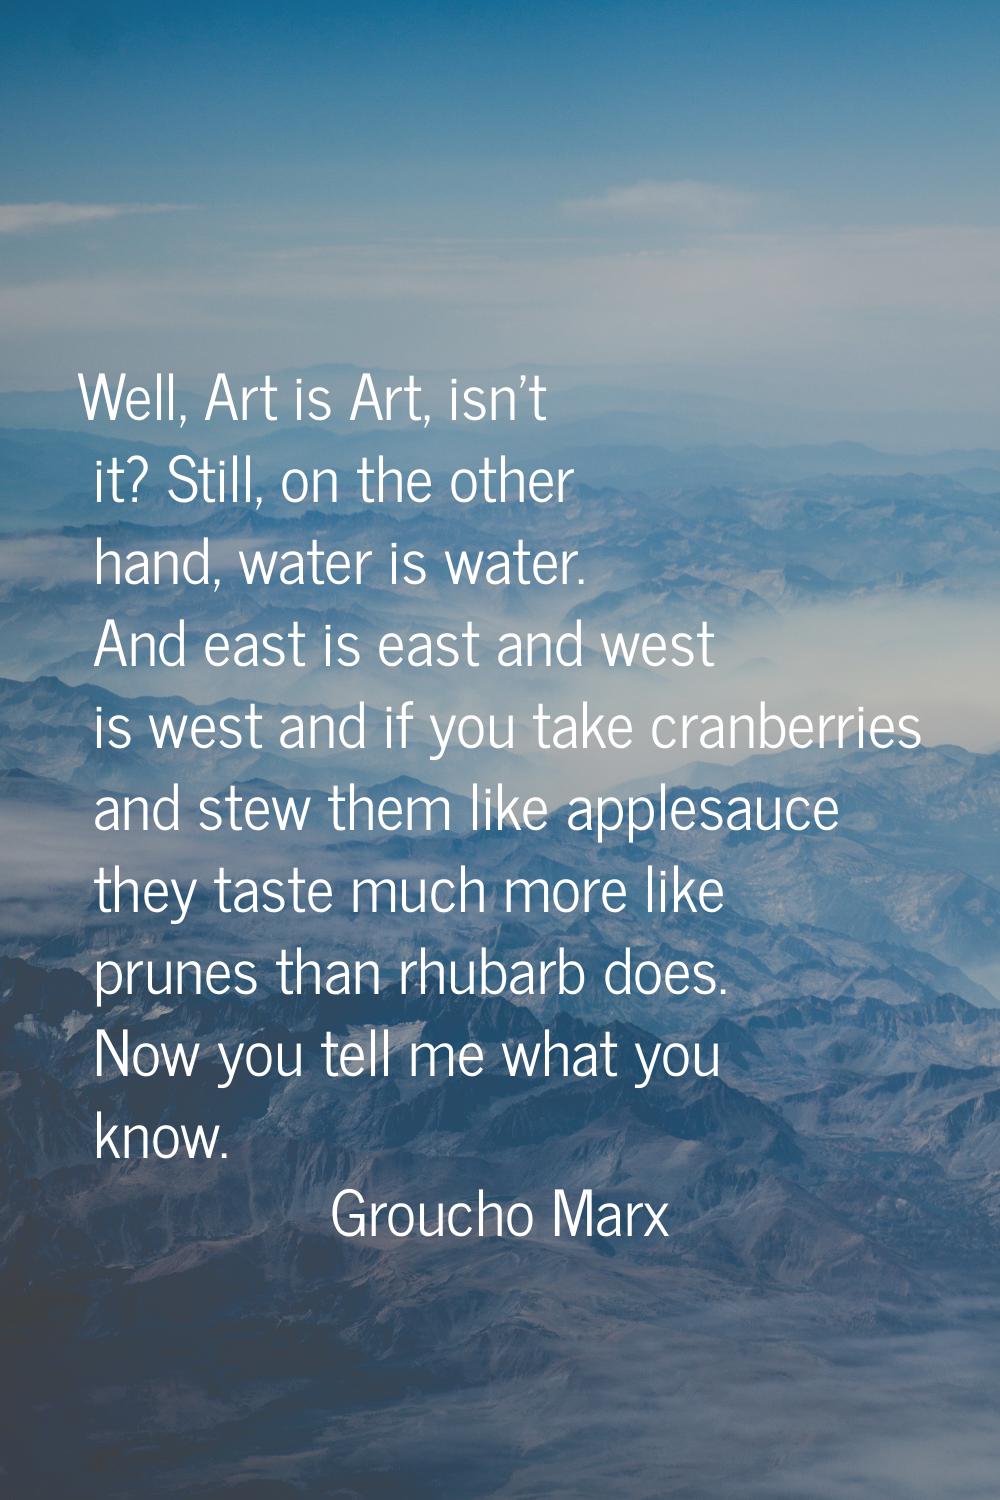 Well, Art is Art, isn't it? Still, on the other hand, water is water. And east is east and west is 